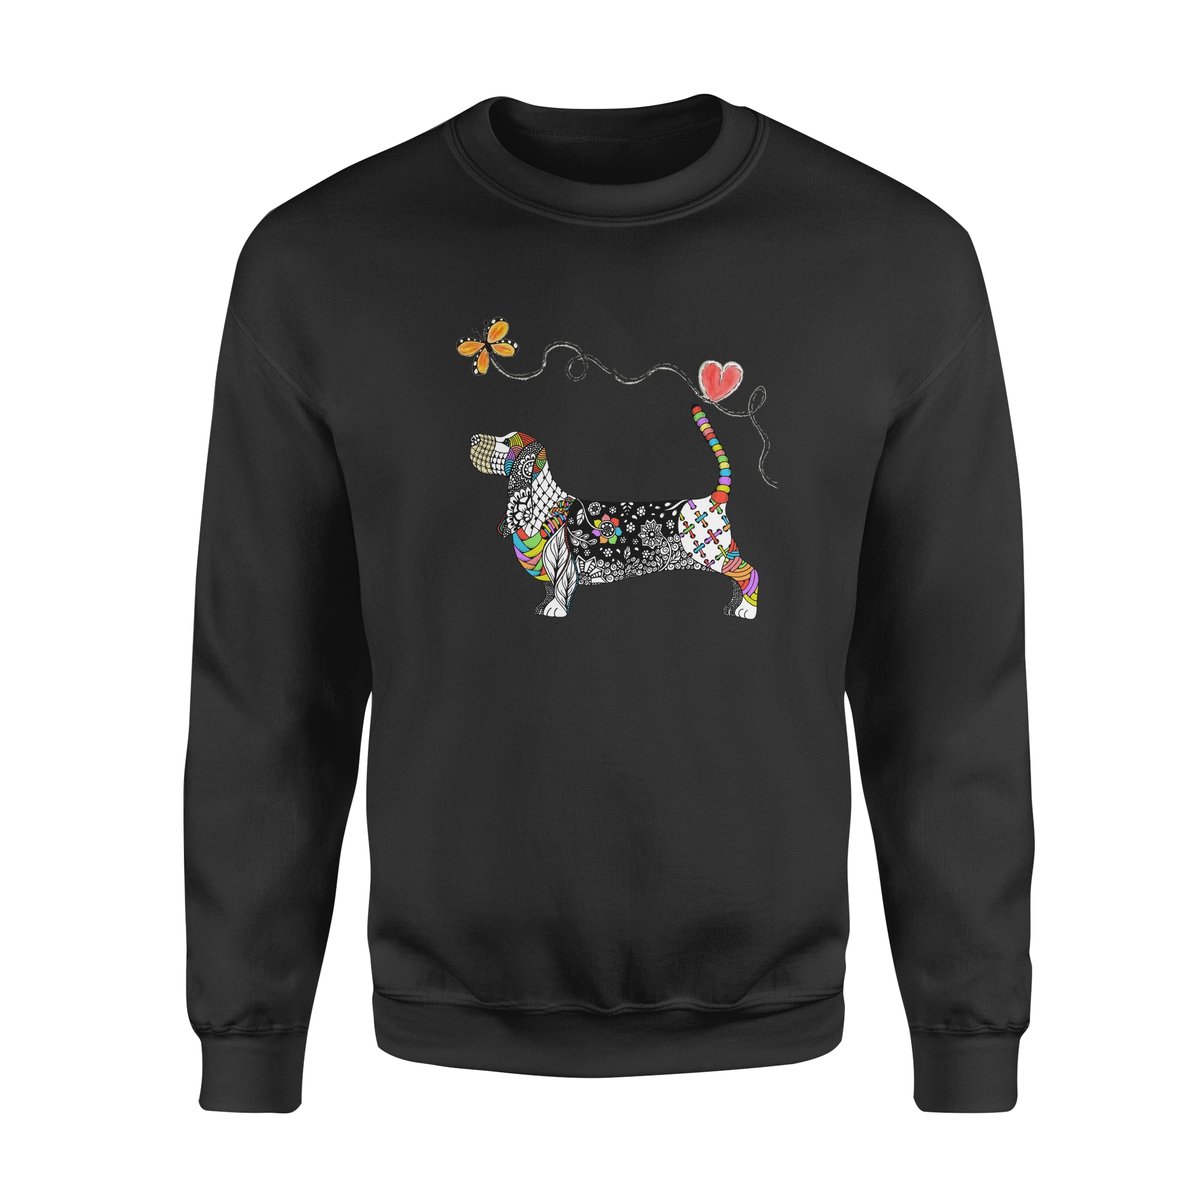 Zentangle Rainbow Basset – Standard Crew Neck Sweatshirt, Gift For Dog Lover, Gift For Basset Lover T-Shirt Hoodie All Color Size S-5Xl